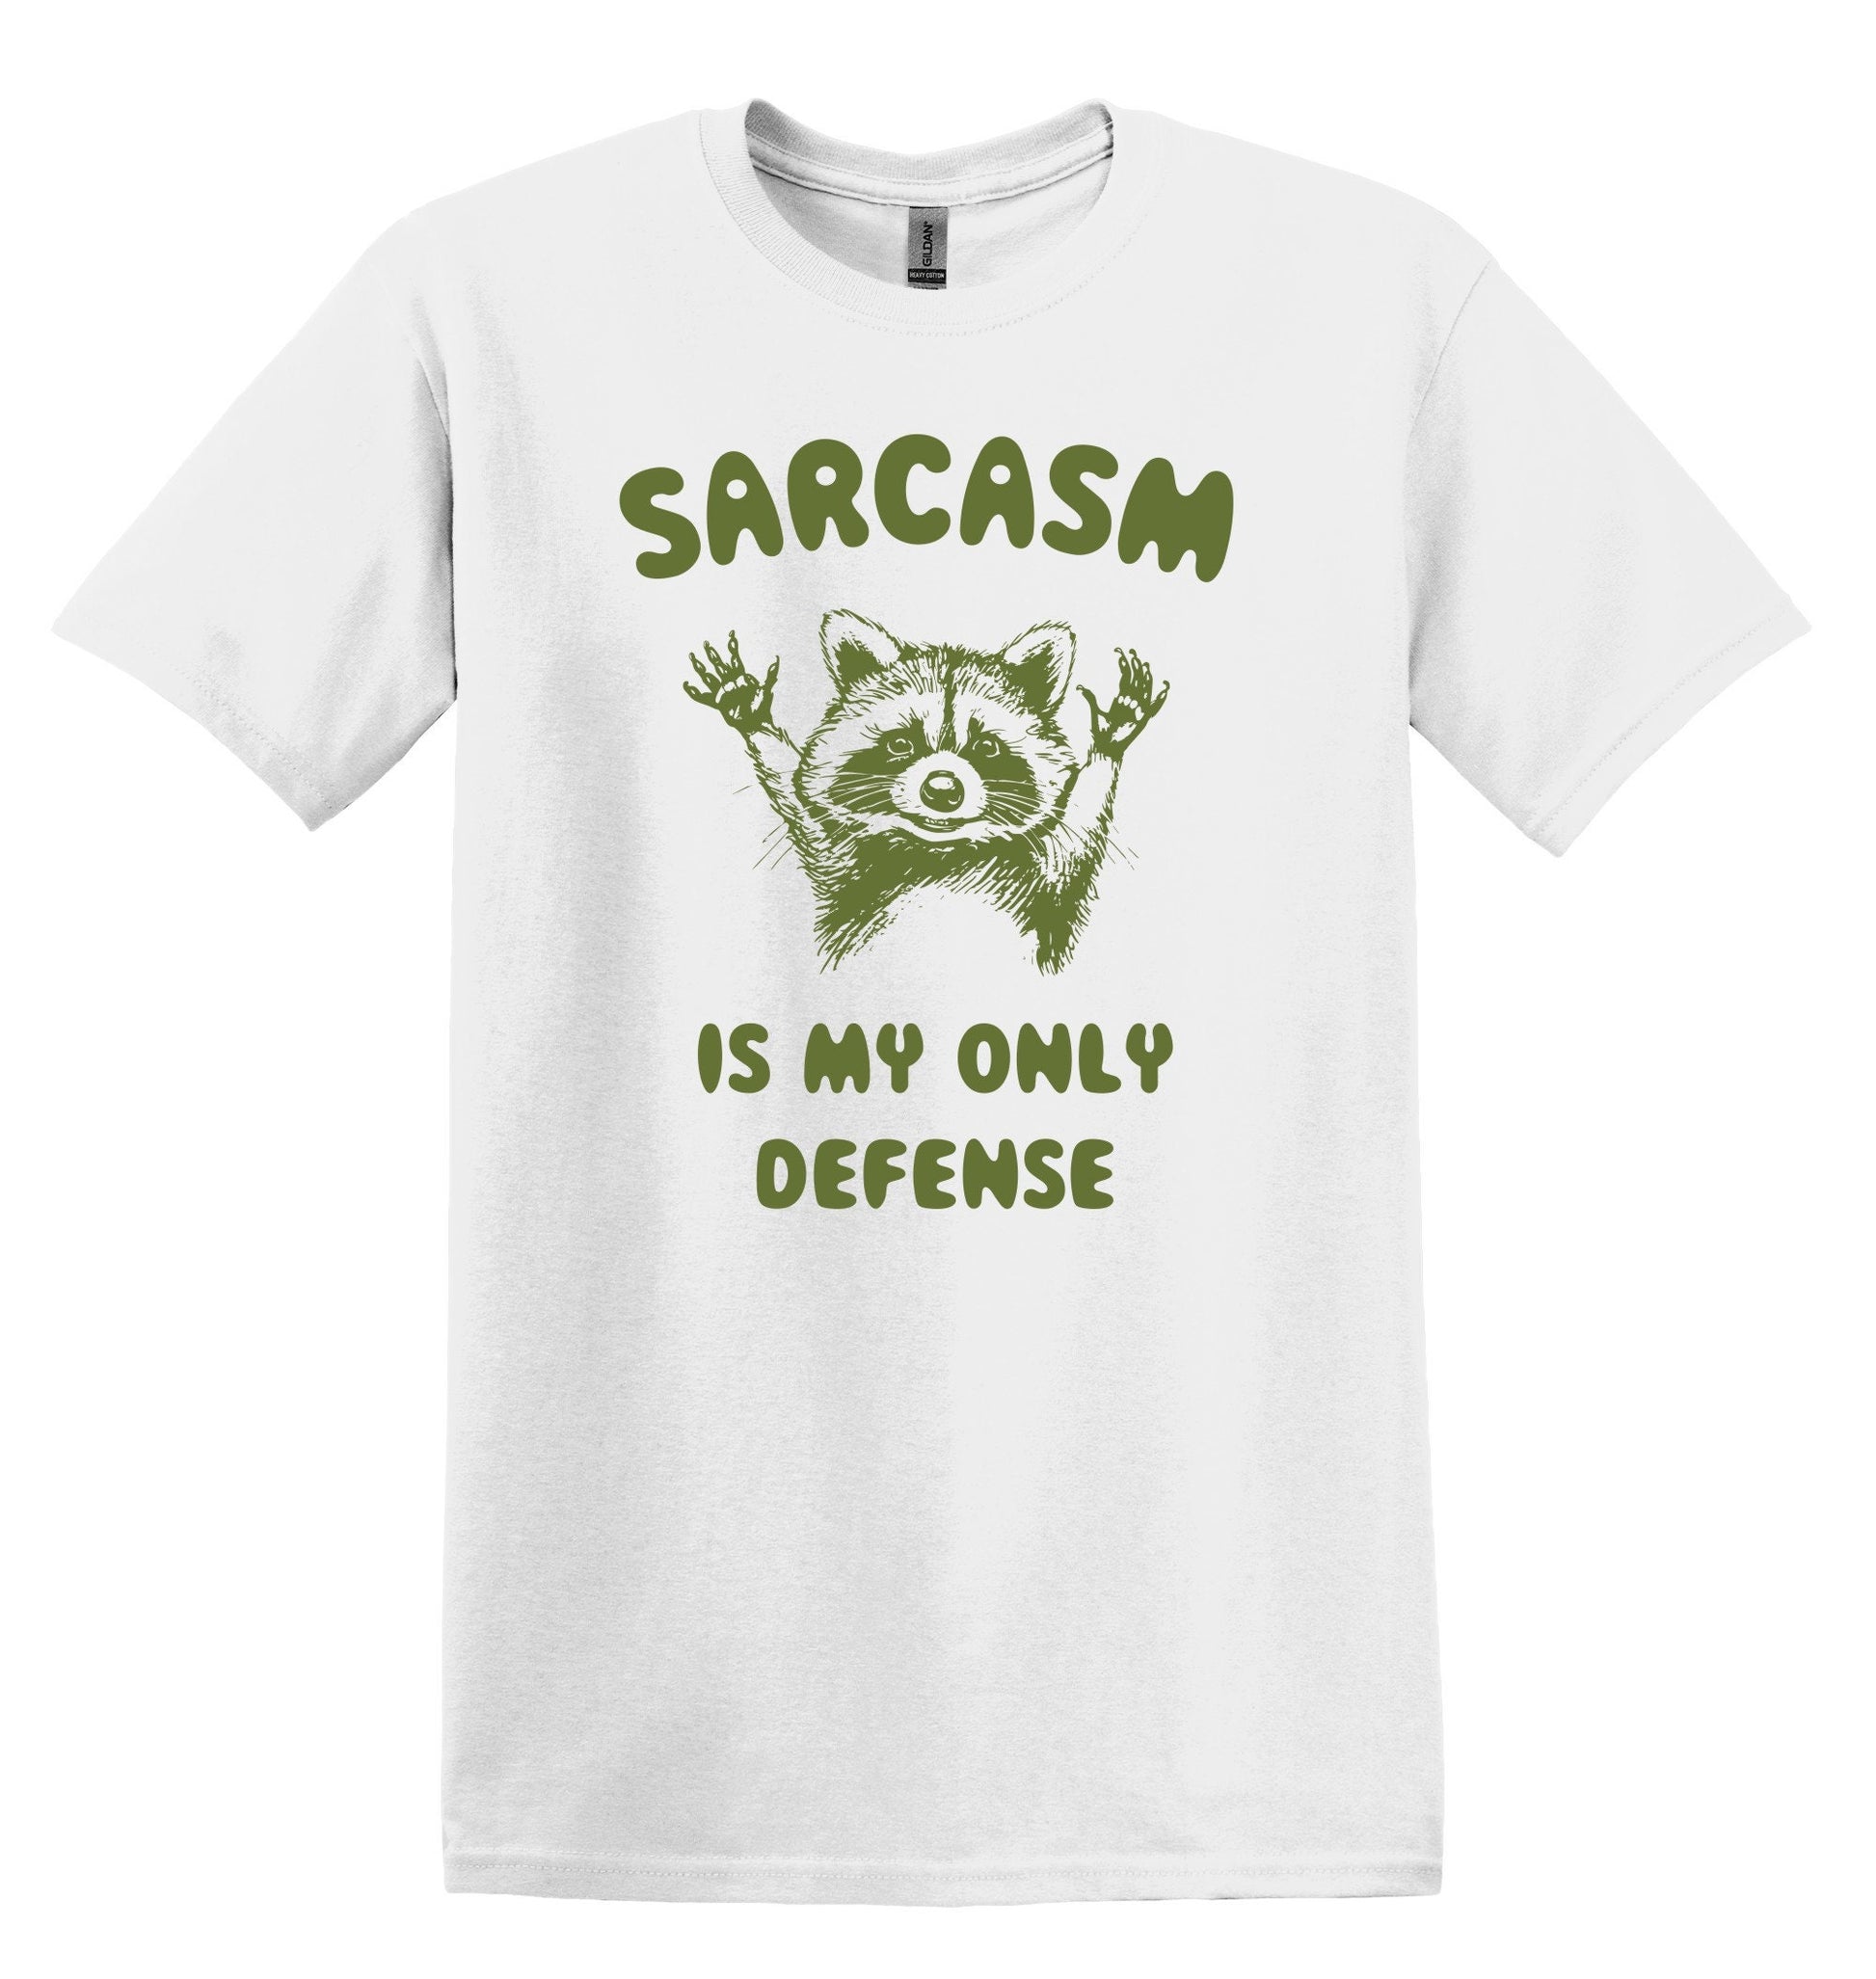 Sarcasm is my only Defense Raccoon T-shirt Graphic Shirt Funny Adult TShirt Vintage Funny TShirt Nostalgia T-Shirt Relaxed Cotton T-Shirt